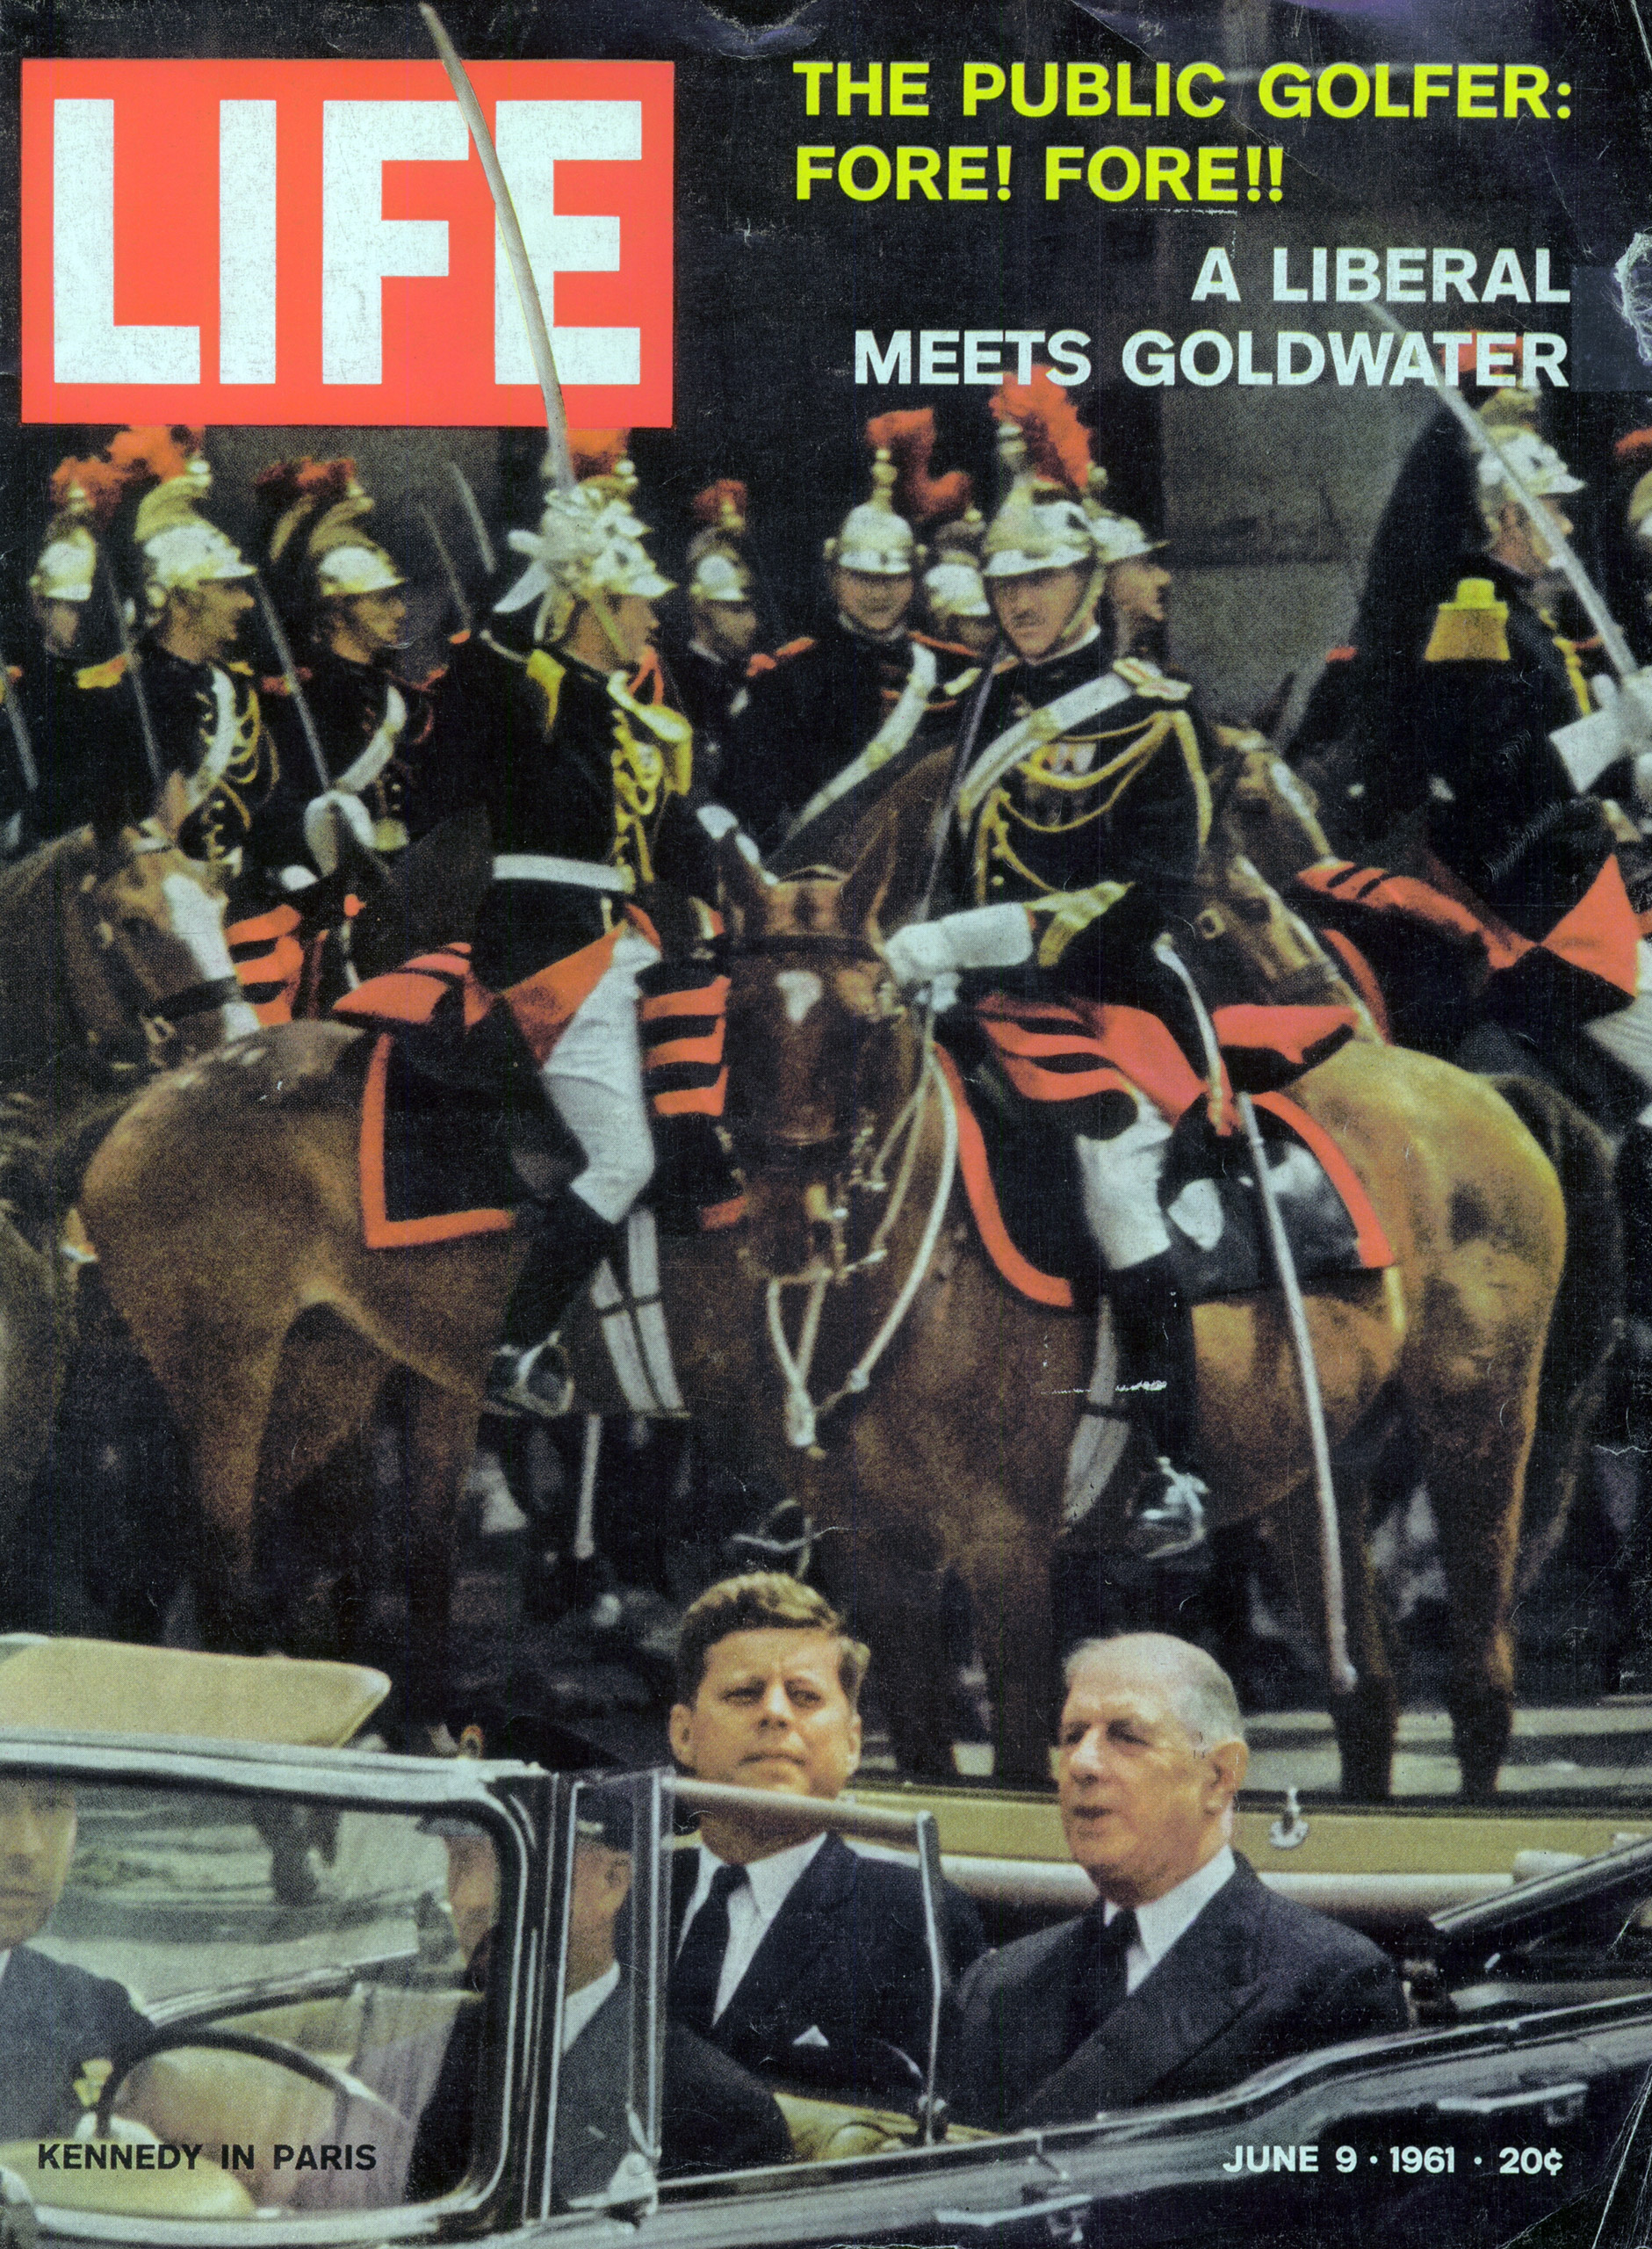 June 9, 1961 cover of LIFE magazine. Cover photo by Paul Schutzer.